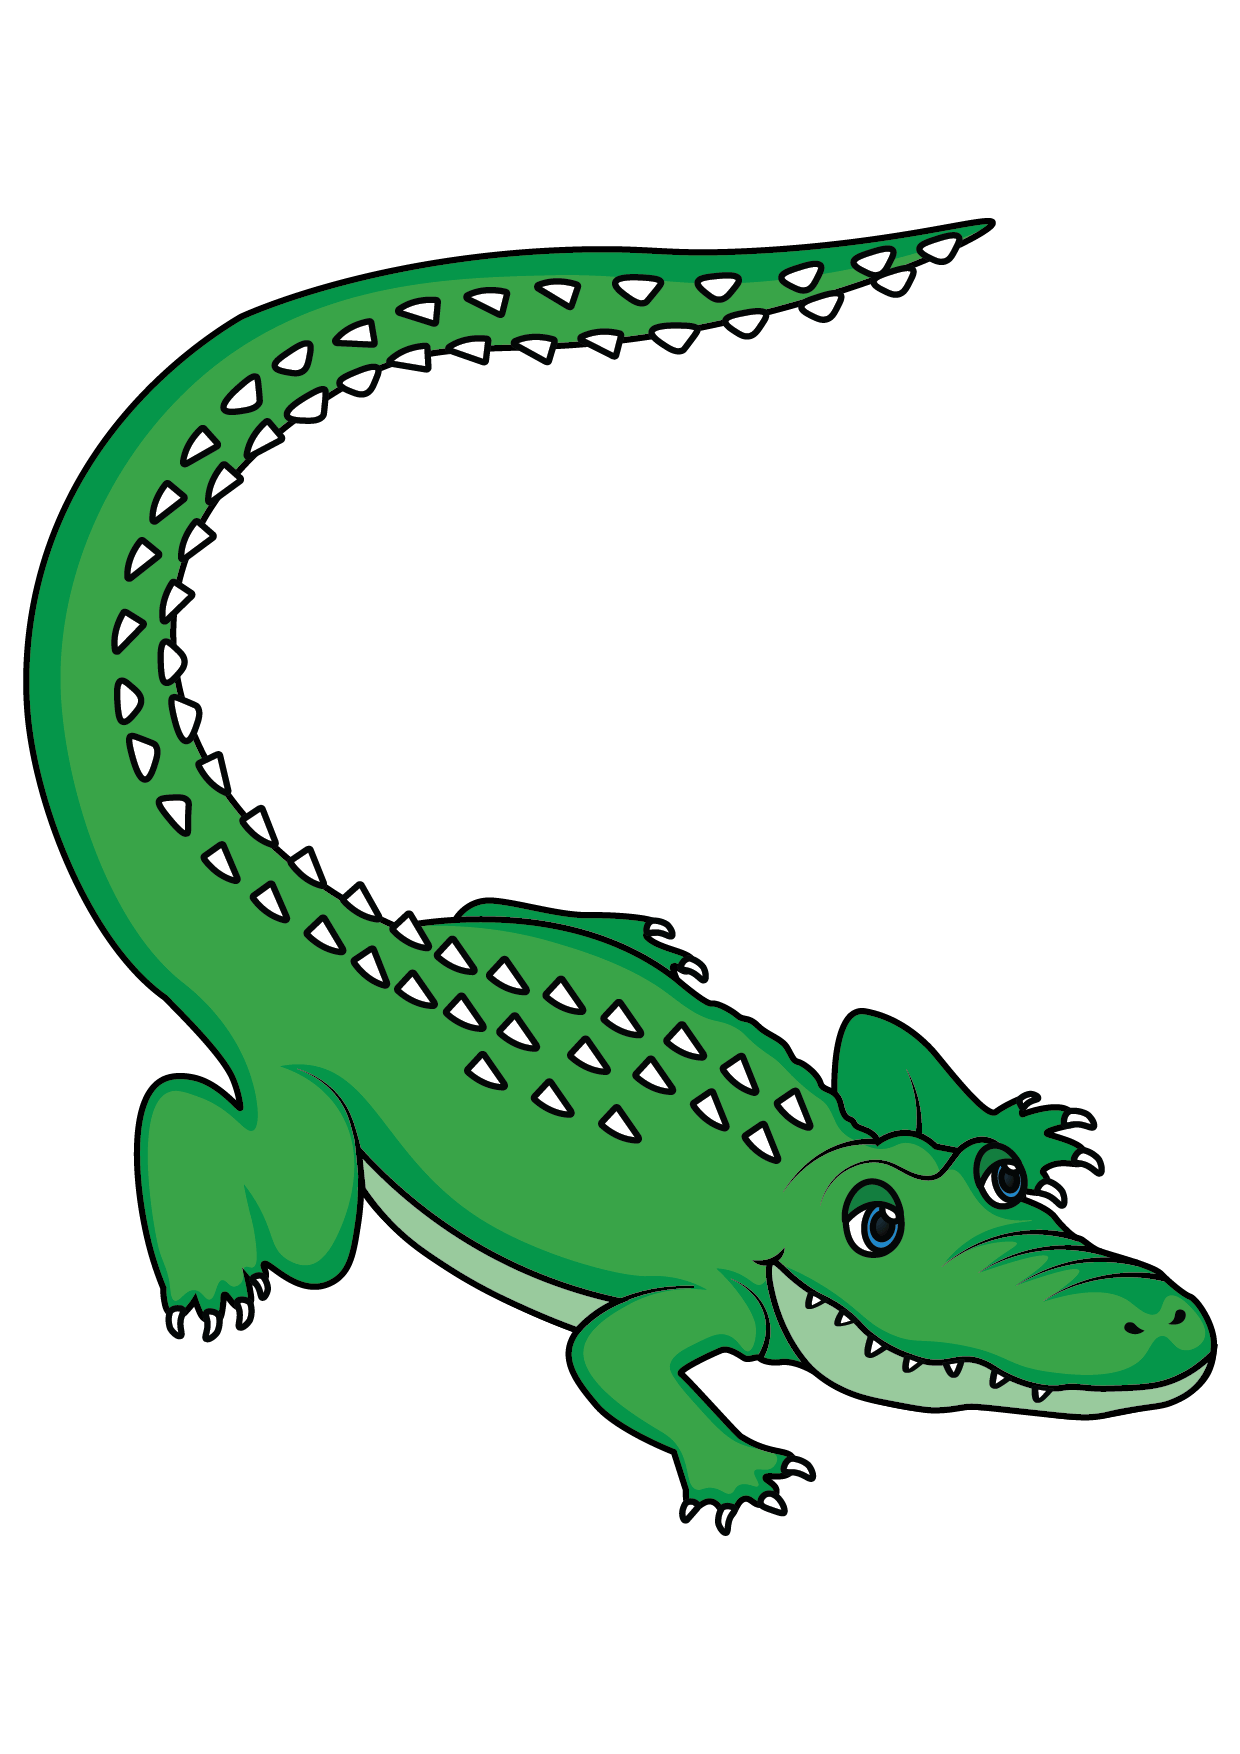 How to Draw An Alligator Step by Step Printable